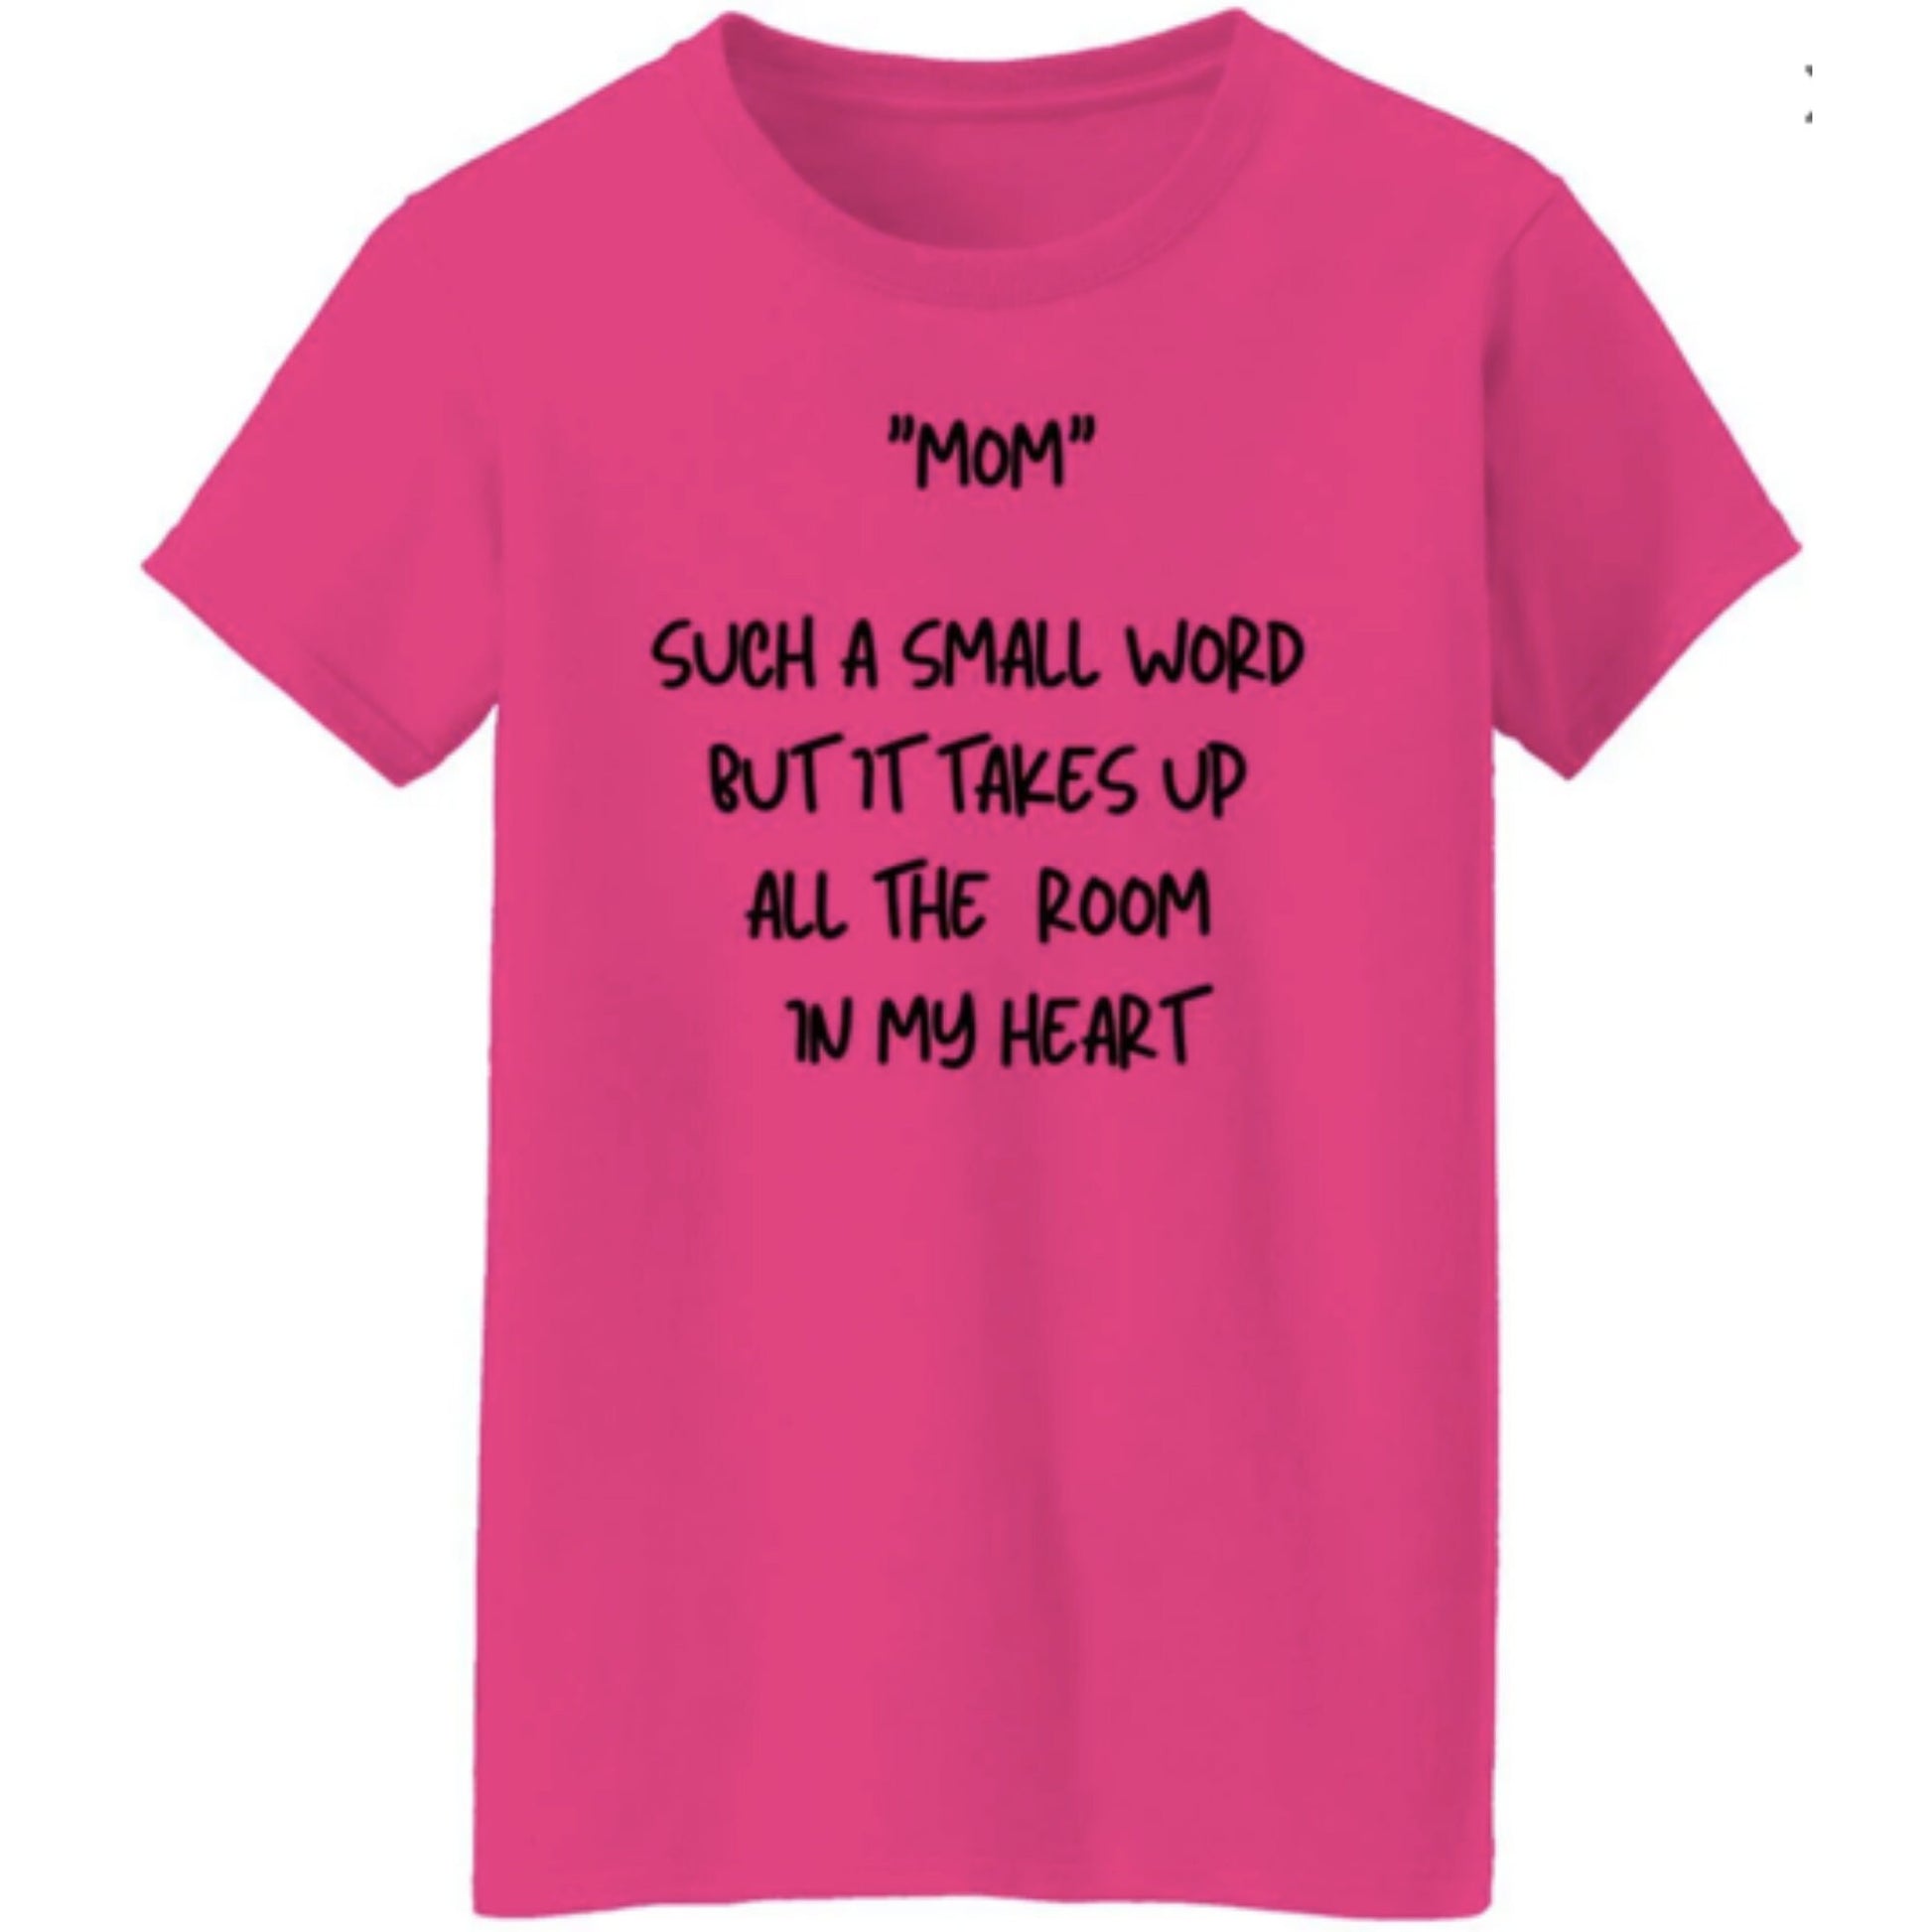 Sweet Tee Shirt for Mom - Mother's Day Shirt, Baby Shower Gift - Shirt for Pregnant Mom - Gift for Mom - Cotton Shirt Gift for Mother's Day